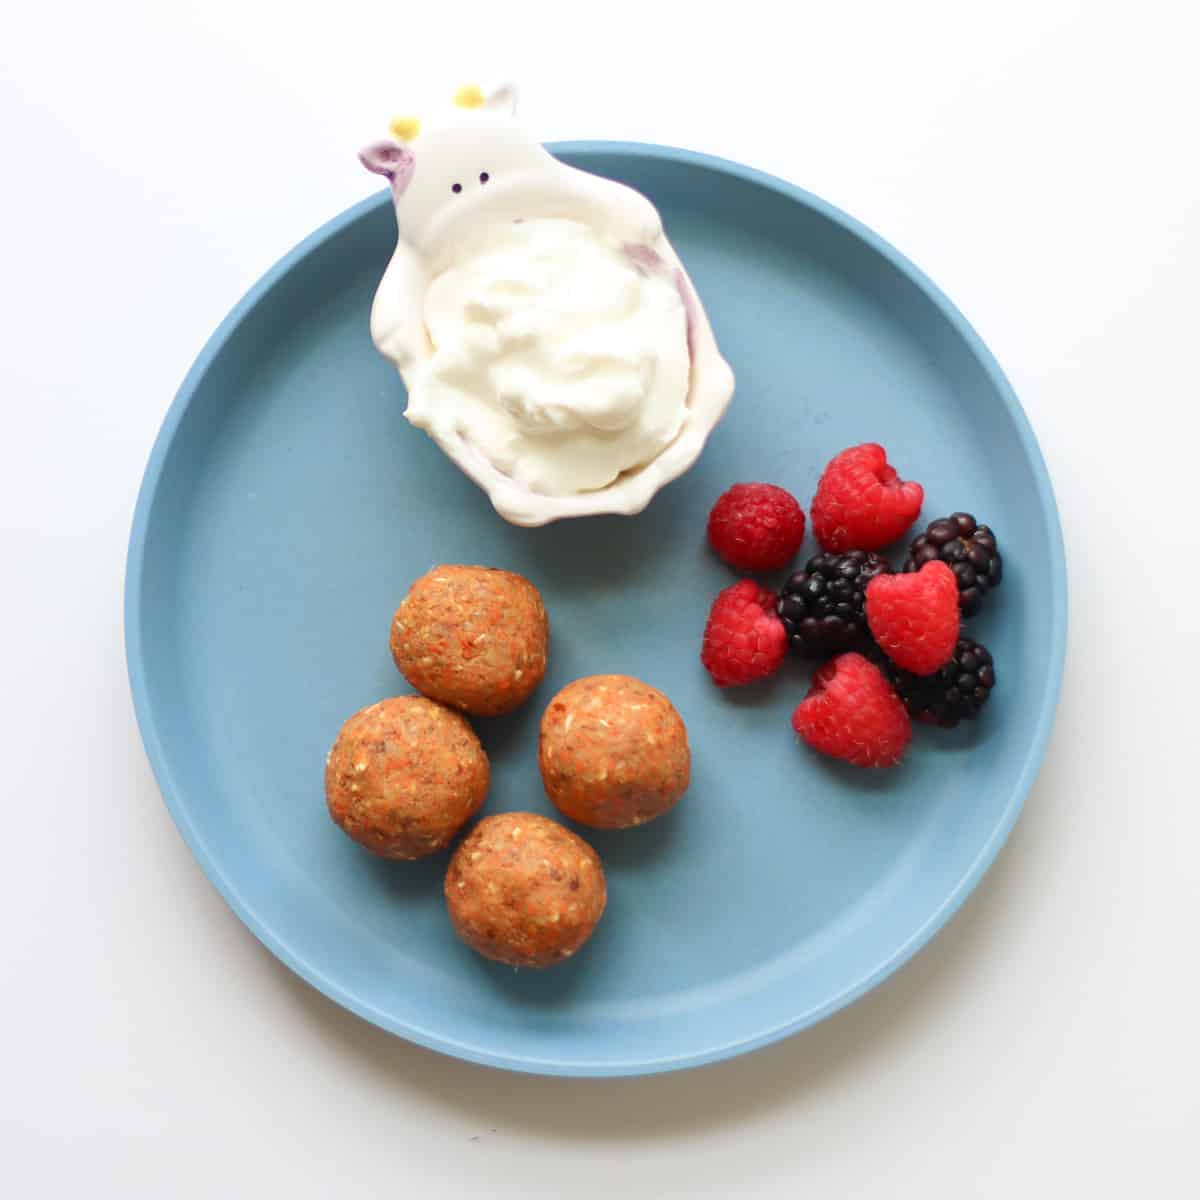 Carrot balls with berries and yogurt on a blue plate.